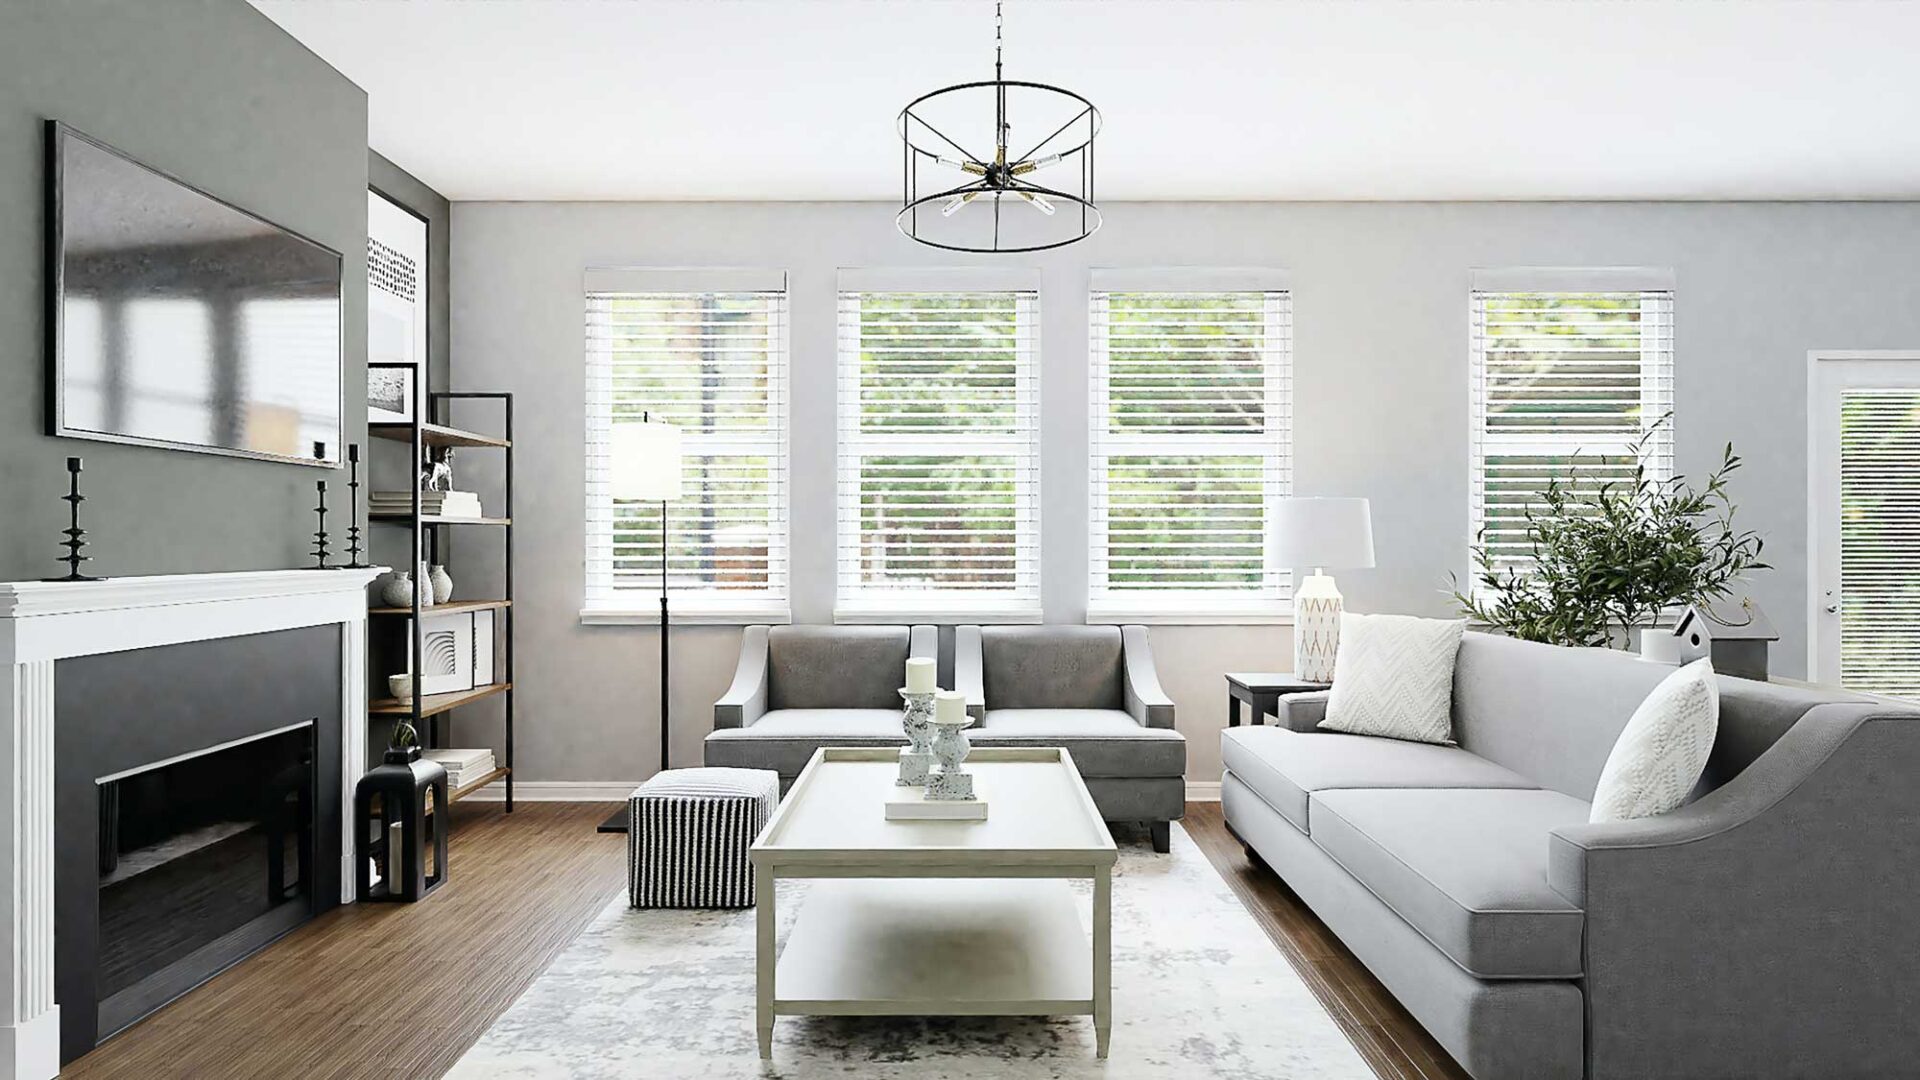 Modern and aesthetic living room space featuring window furnishings for double-hung windows: Plantation Shutters.